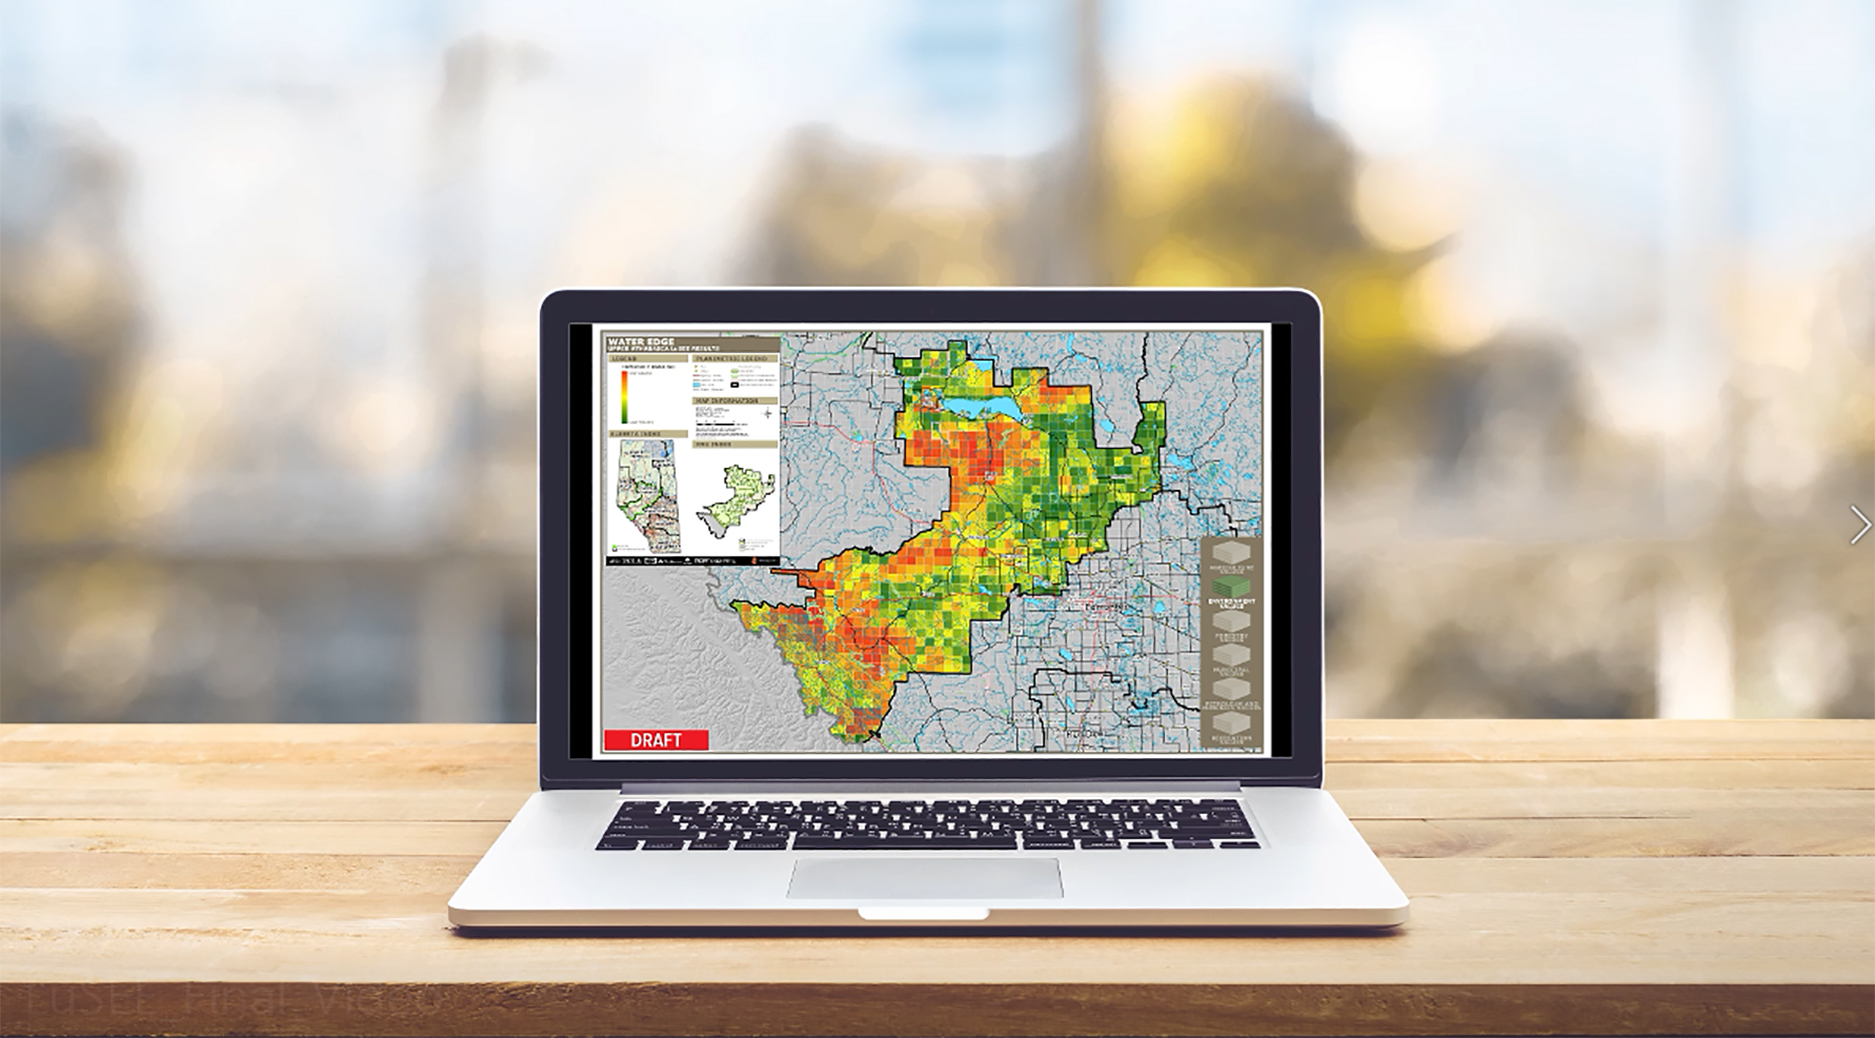 LuSEE spatially identifies areas of importance for a variety of values on a landscape, including forestry, energy, agricultural, municipal, environmental, and recreational.